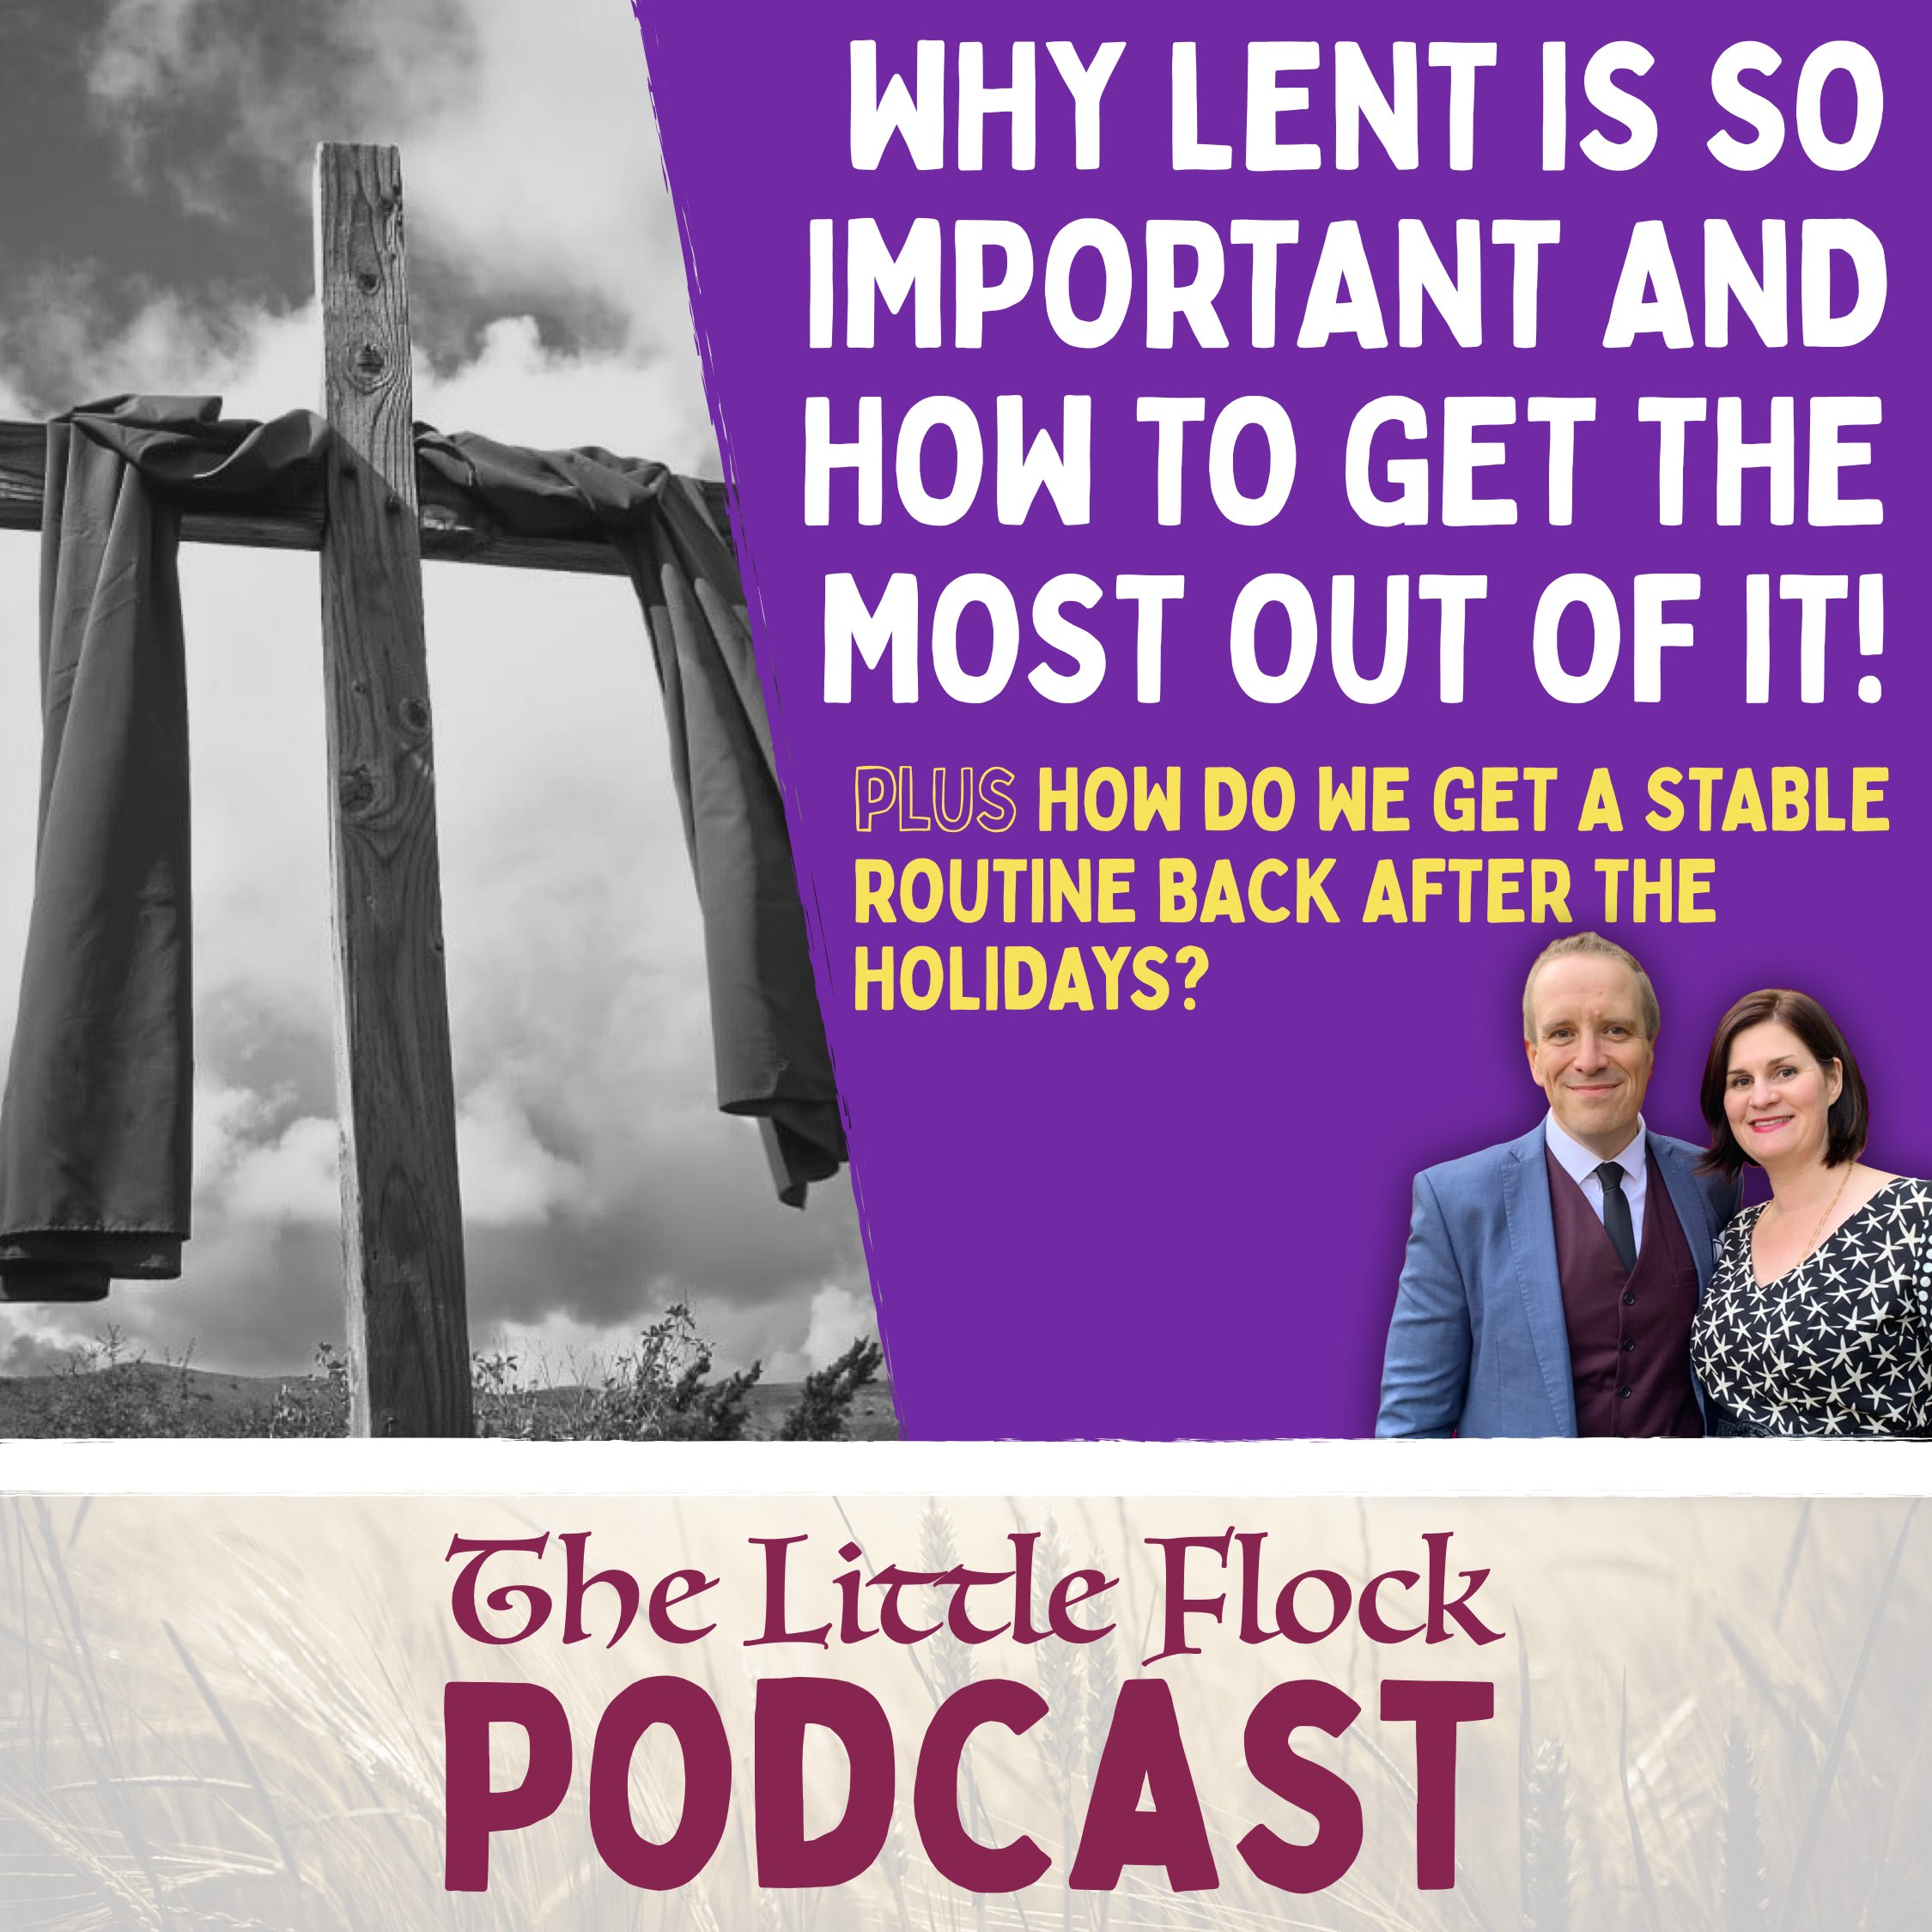 16. Why is Lent so important and how do we get the most out of it, PLUS: How do we get a routine back after the holidays?